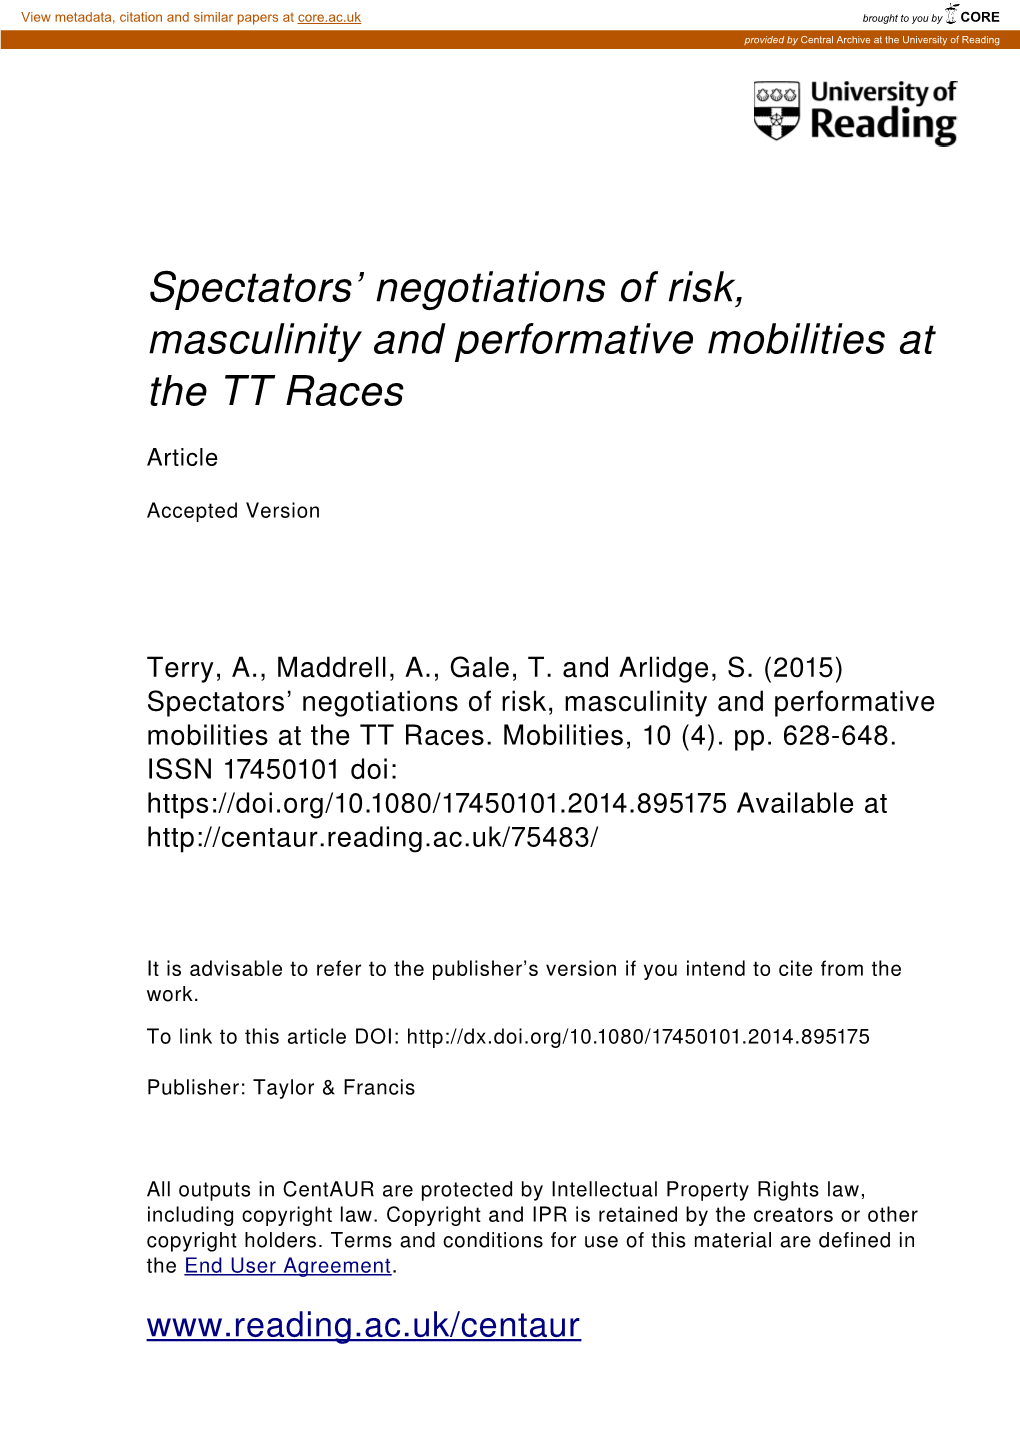 Spectators' Negotiations of Risk, Masculinity and Performative